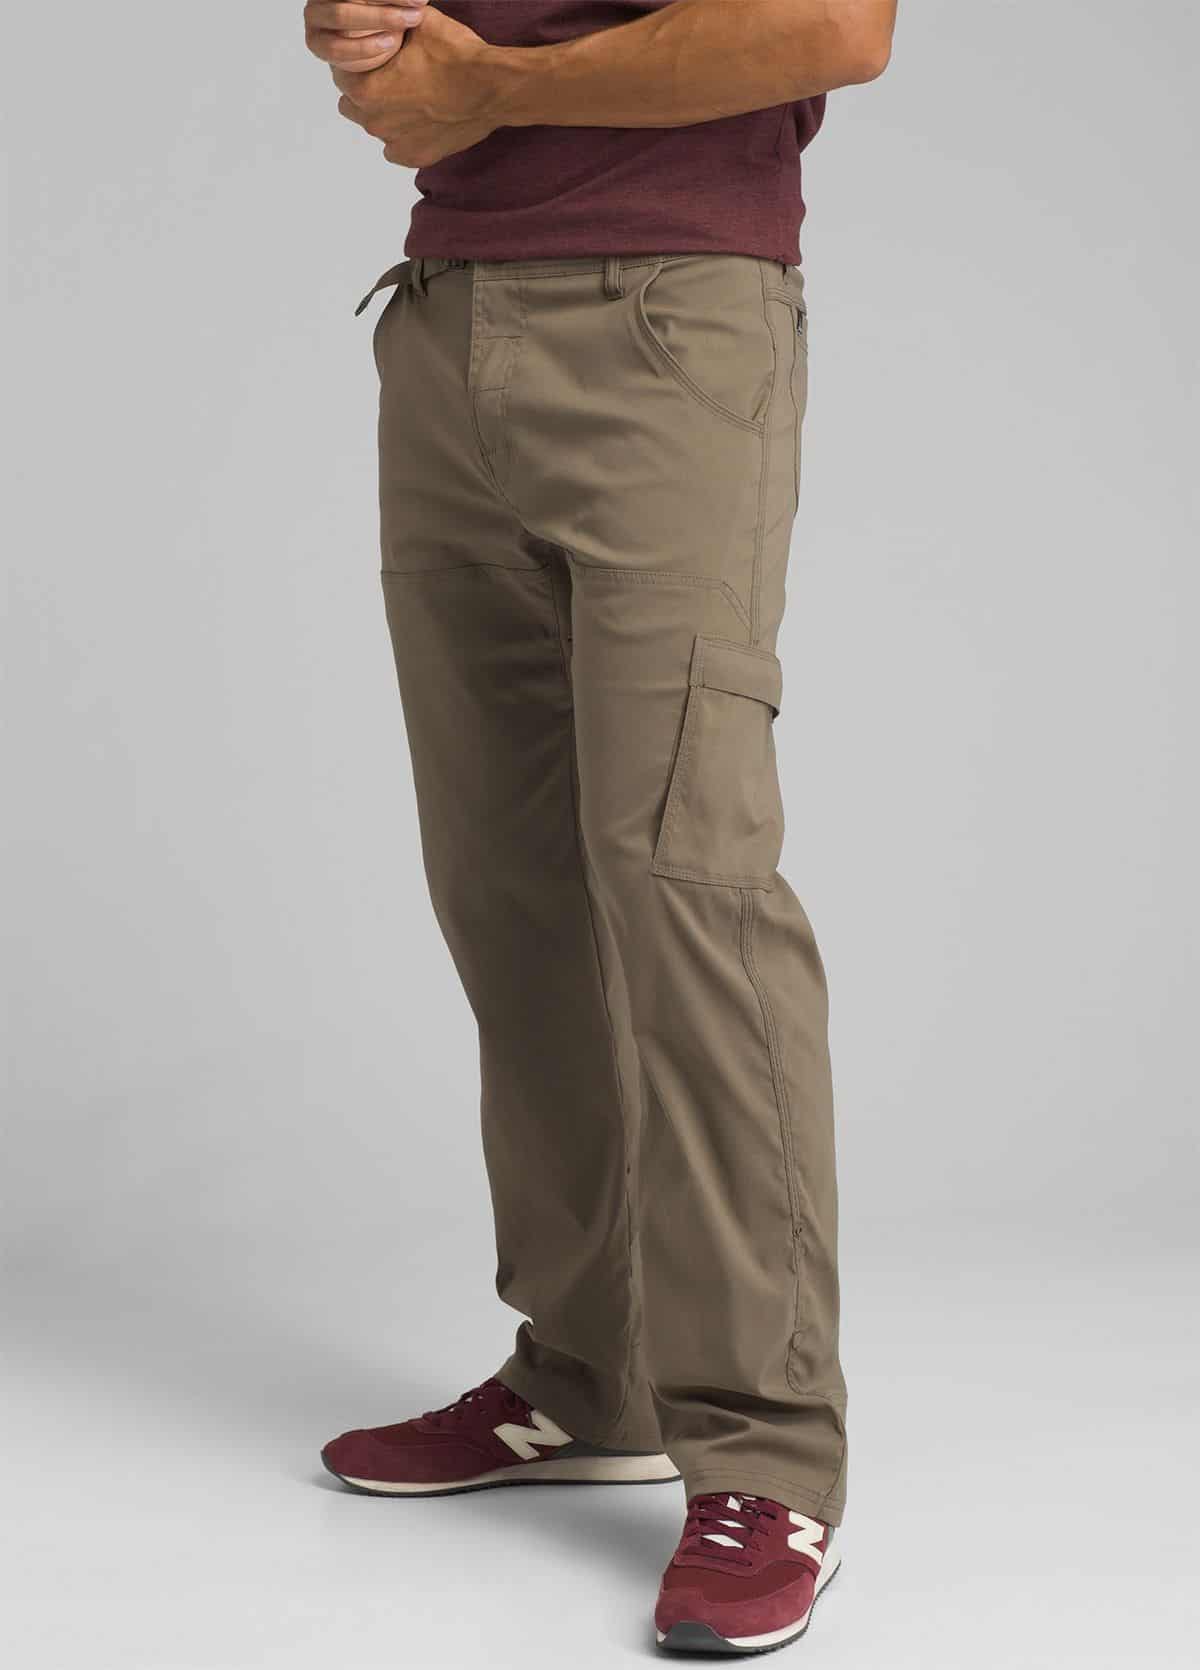 travel pants for mens